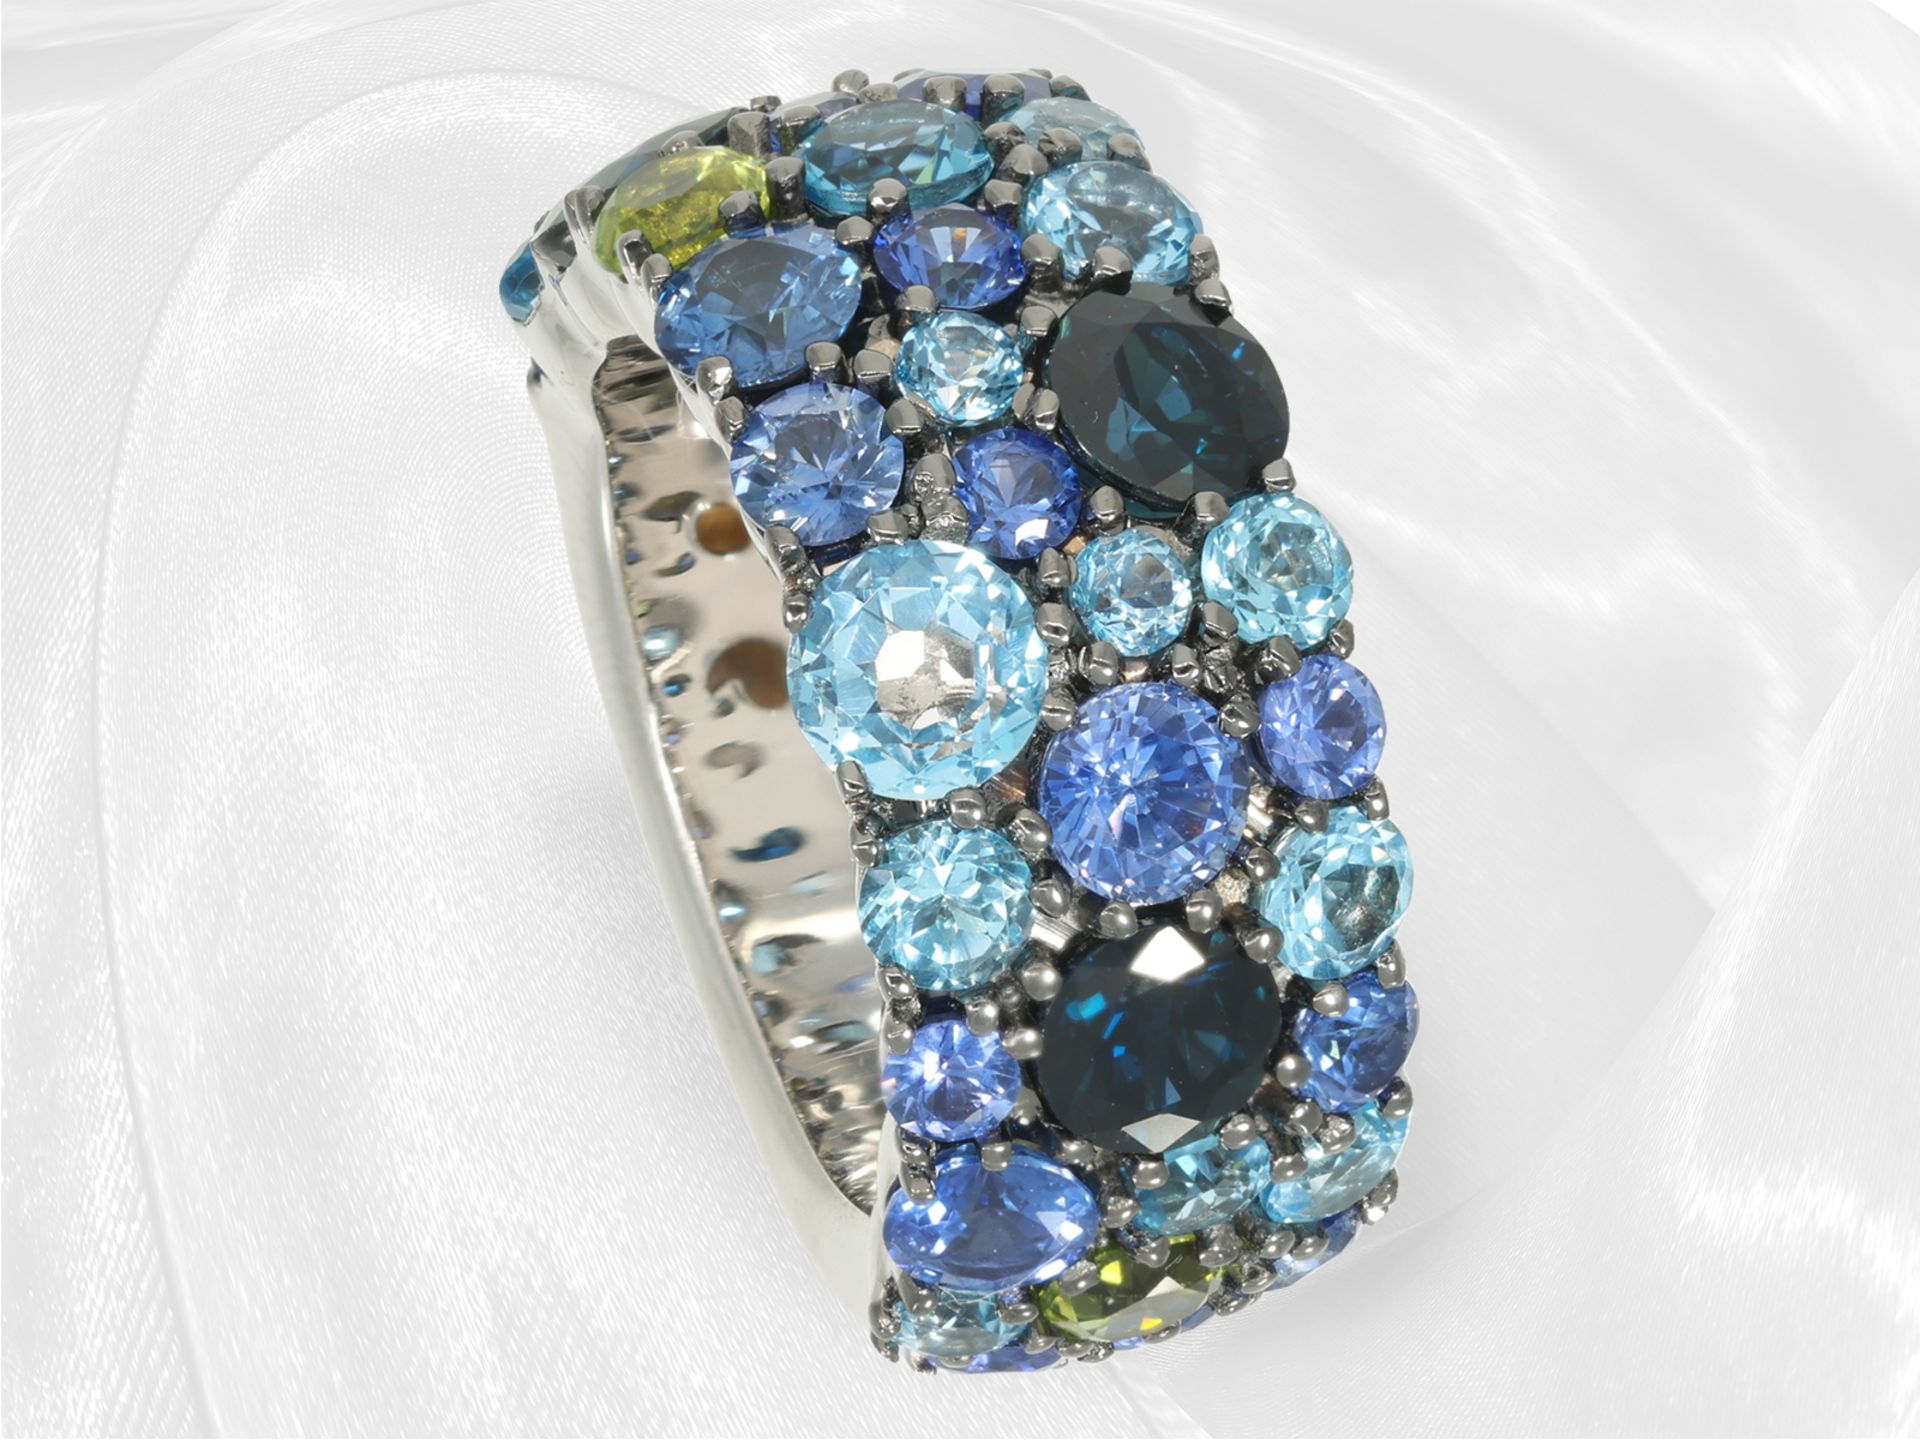 Goldsmith's ring by Cervera, model "Tiara" with sapphires, topazes and peridots, unworn